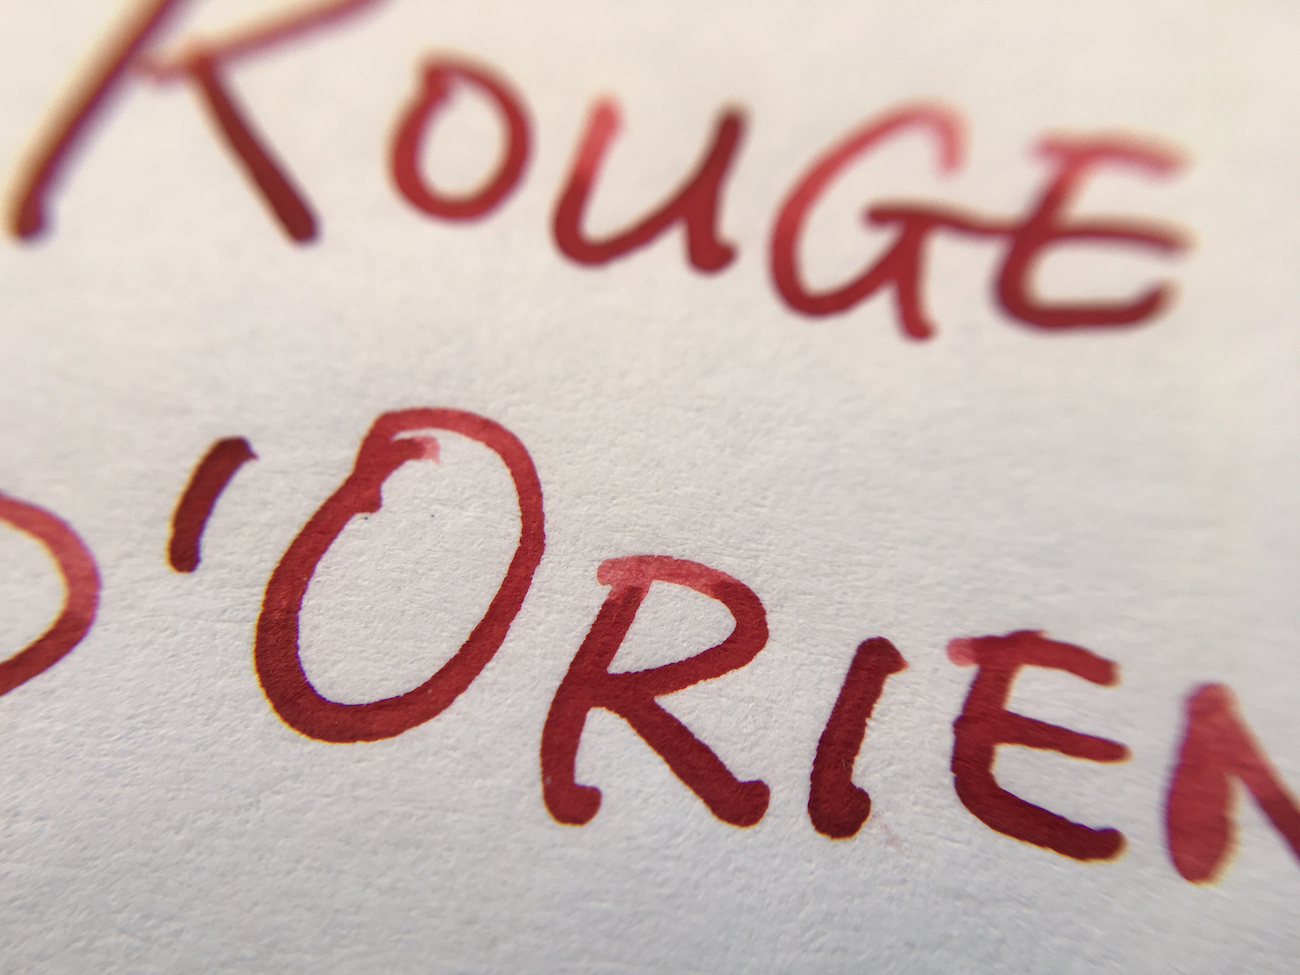 Jacques Herbin Rouge D'orient - Ink Reviews - The Fountain Pen Network